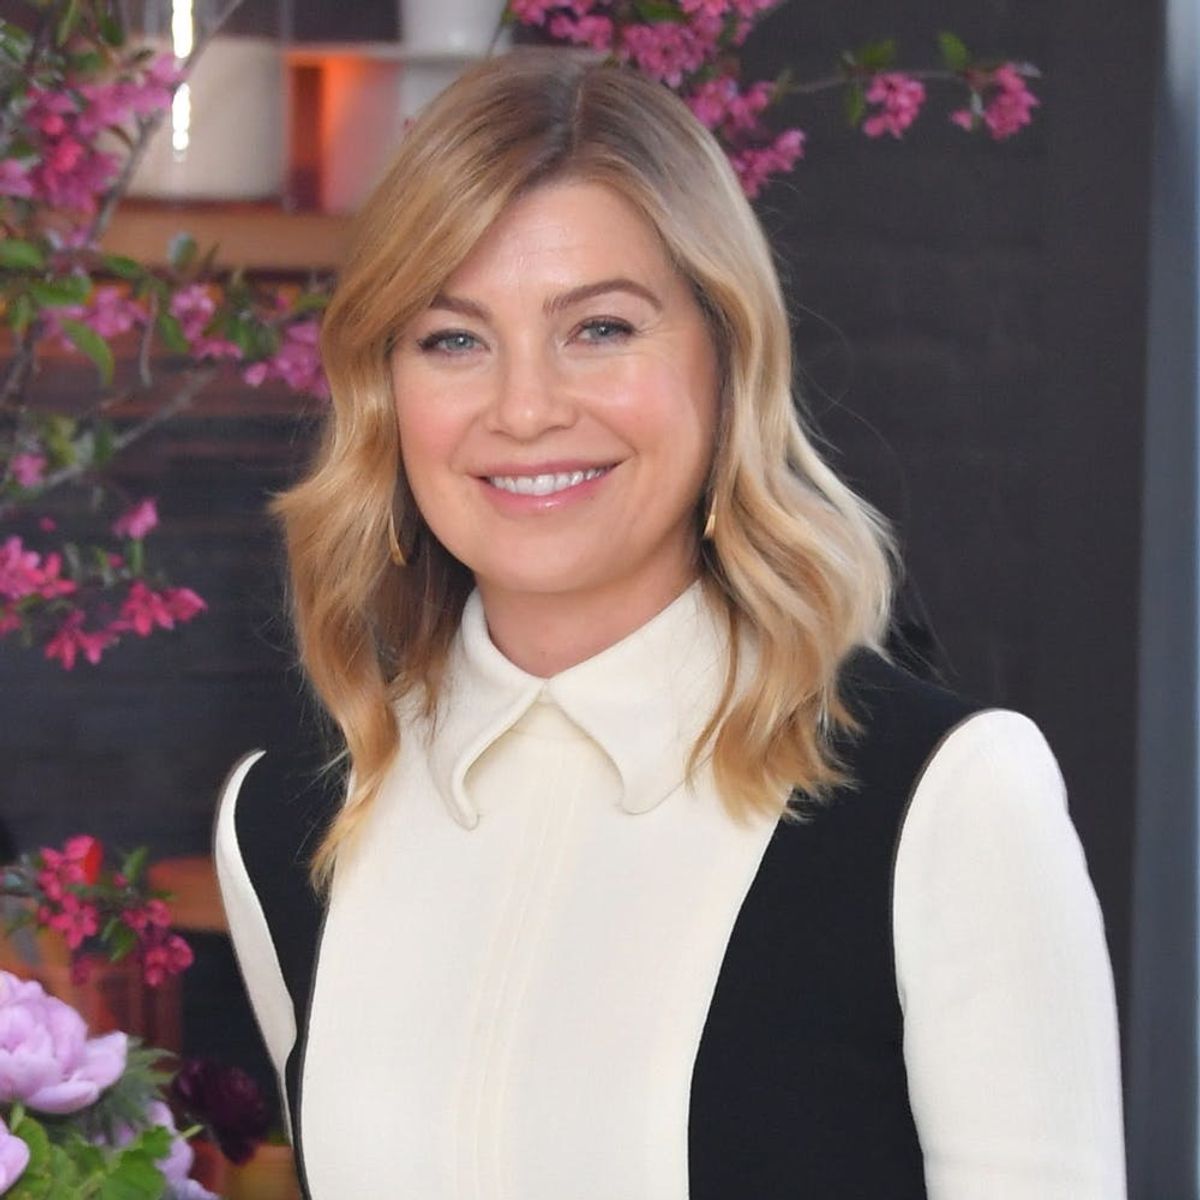 Ellen Pompeo Says You’ll Definitely Need Tissues for the ‘Grey’s Anatomy’ Season 14 Finale